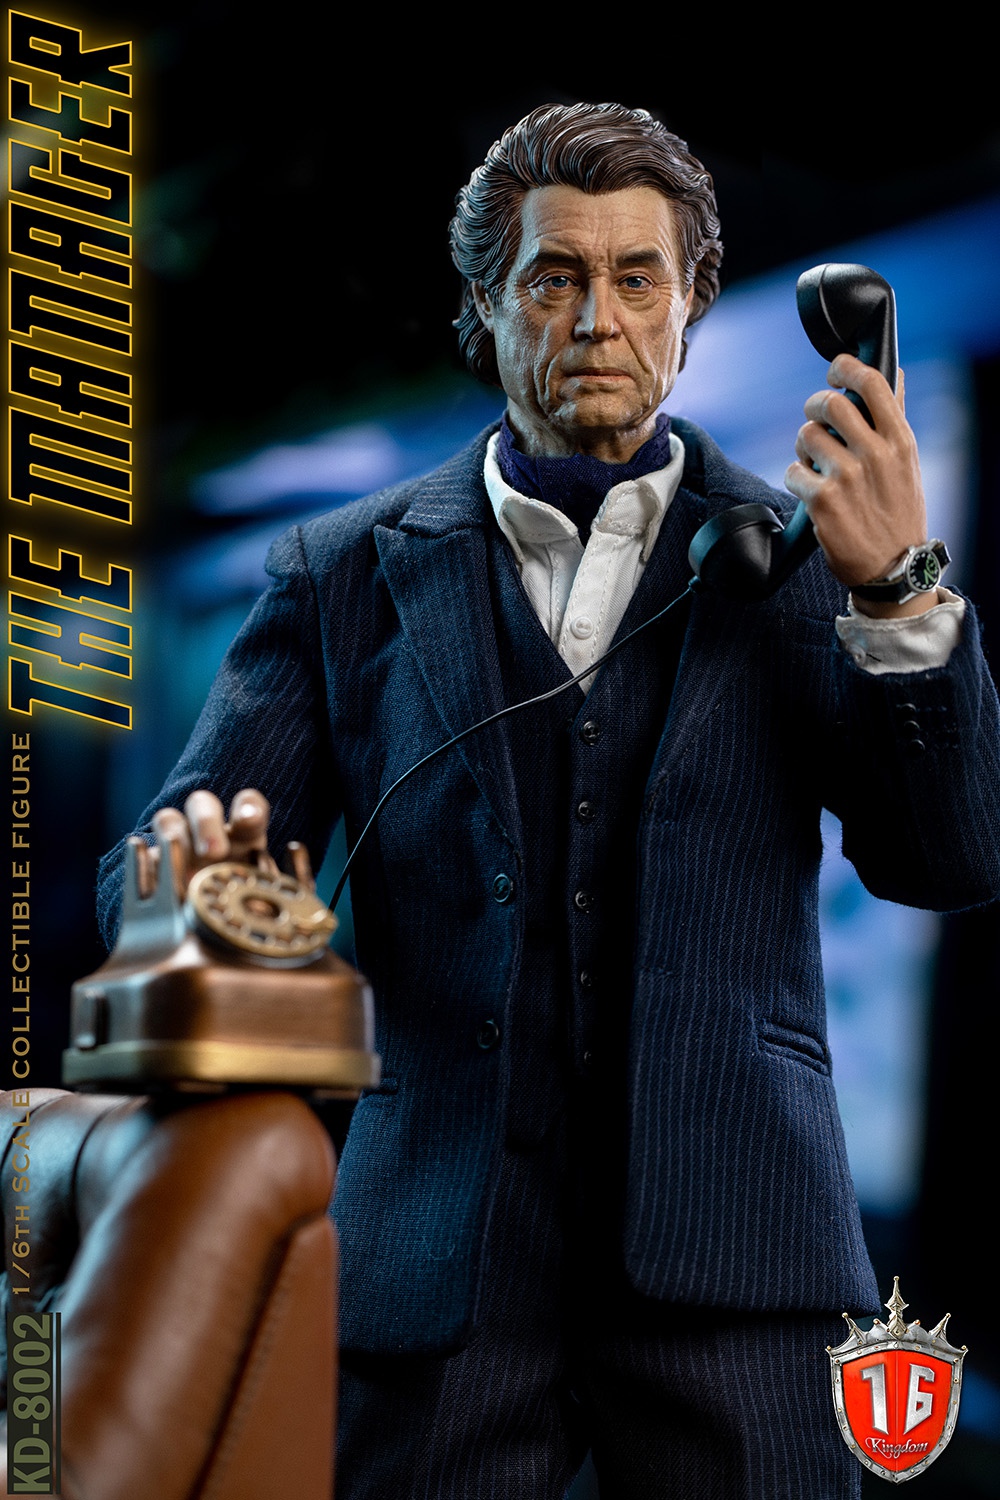 TheManager - NEW PRODUCT: Kingdom: 1/6 The Manager Winston Action Figure KD-8002 11455410